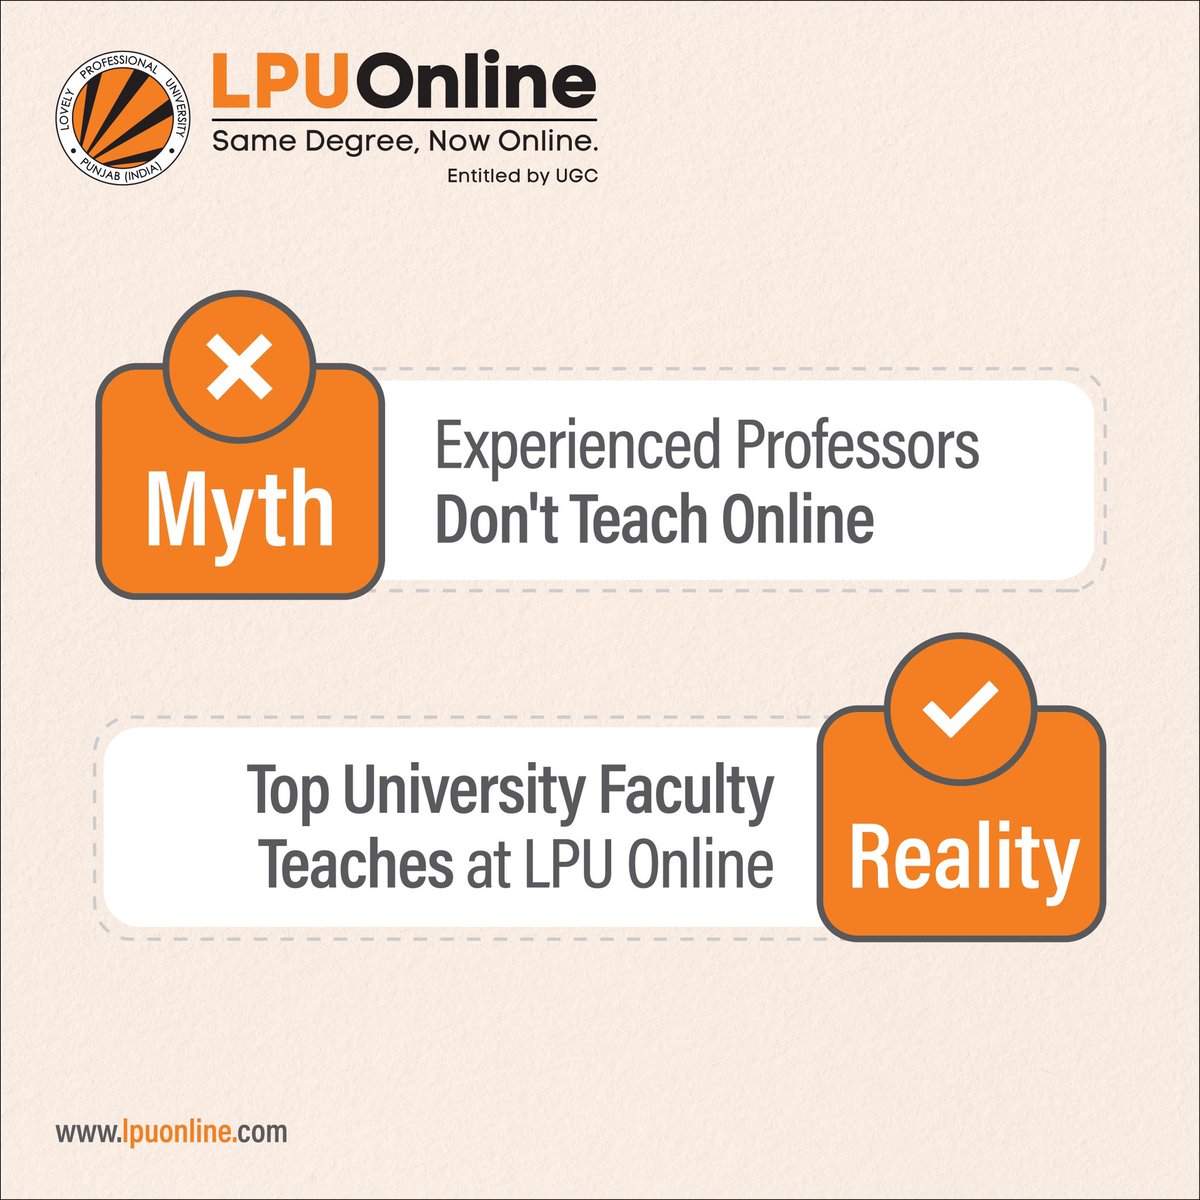 The right guidance can jumpstart and transform careers.
 ​
Apply for our programmes today & receive the requisite knowledge from our reputed offline faculty.

#OnlineLearning #OnlineDegree #OnlineEducation #MythvsFact #MythBusters #Faculty #LiveClasses #LPUOnline